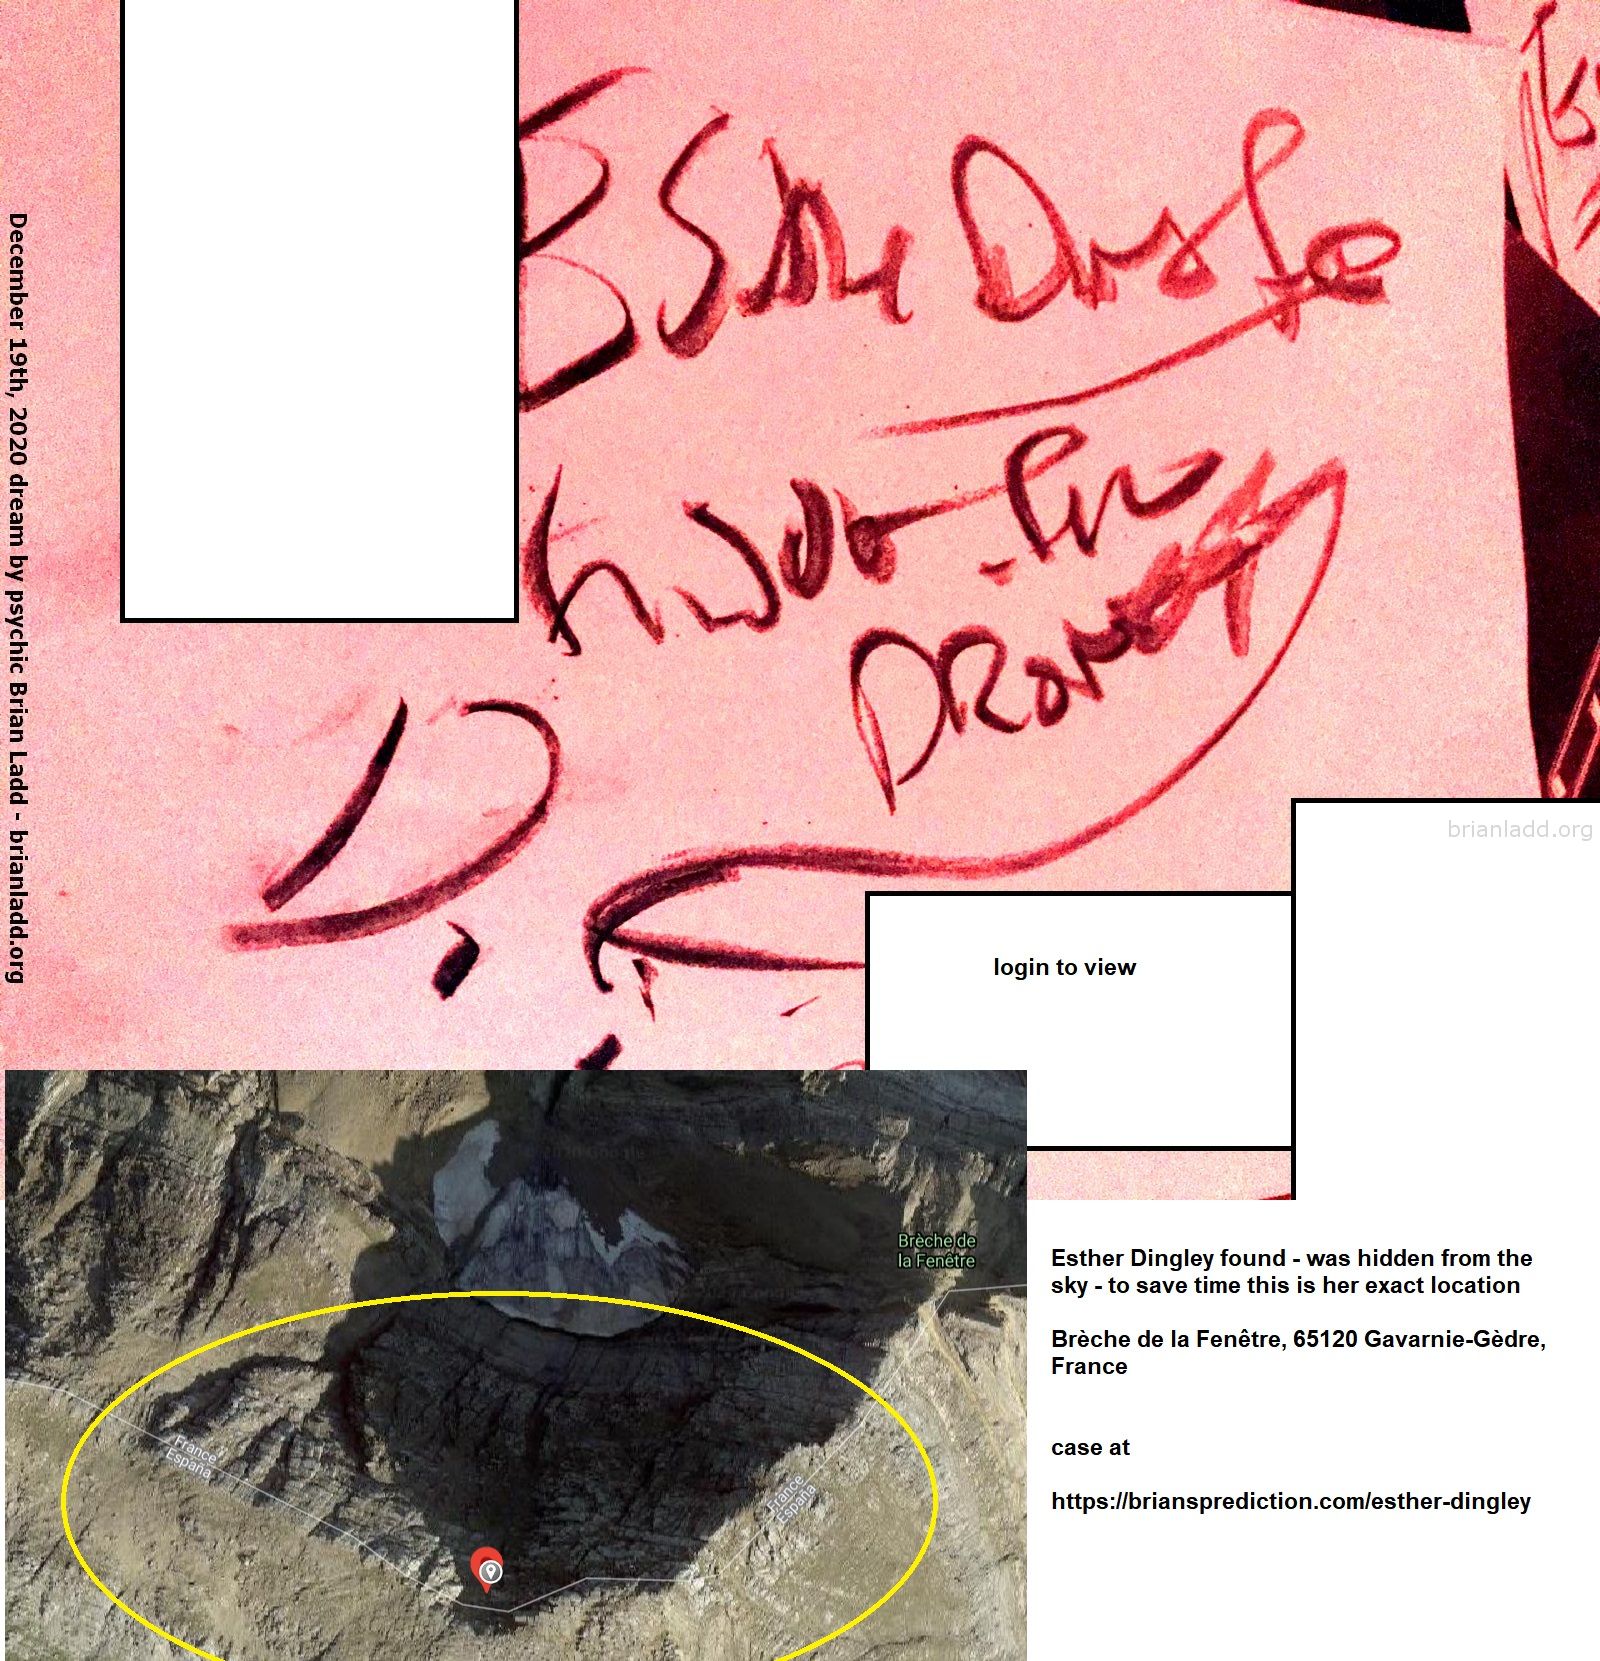 14191 19 December 2020 4 - Esther Dingley Found - Was Hidden From The Sky - To Save Time This Is Her Exact Location.  Br...
Esther Dingley Found - Was Hidden From The Sky - To Save Time This Is Her Exact Location.  Brã¨Che De La Fenãªtre, 65120 Gavarnie-Gã¨Dre, France  Case At
